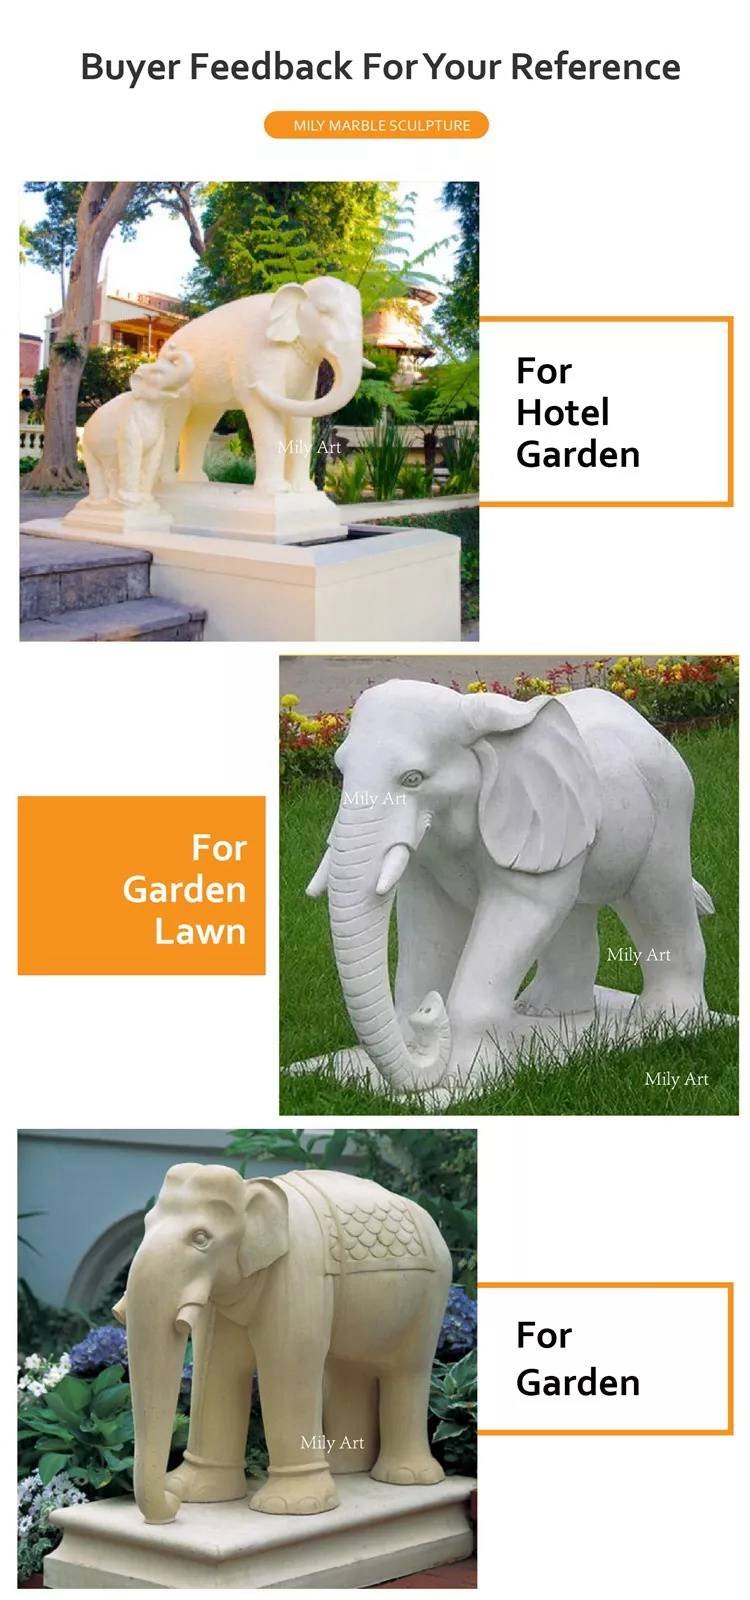 1.4.feedback of marble elephant statues mily sculpture